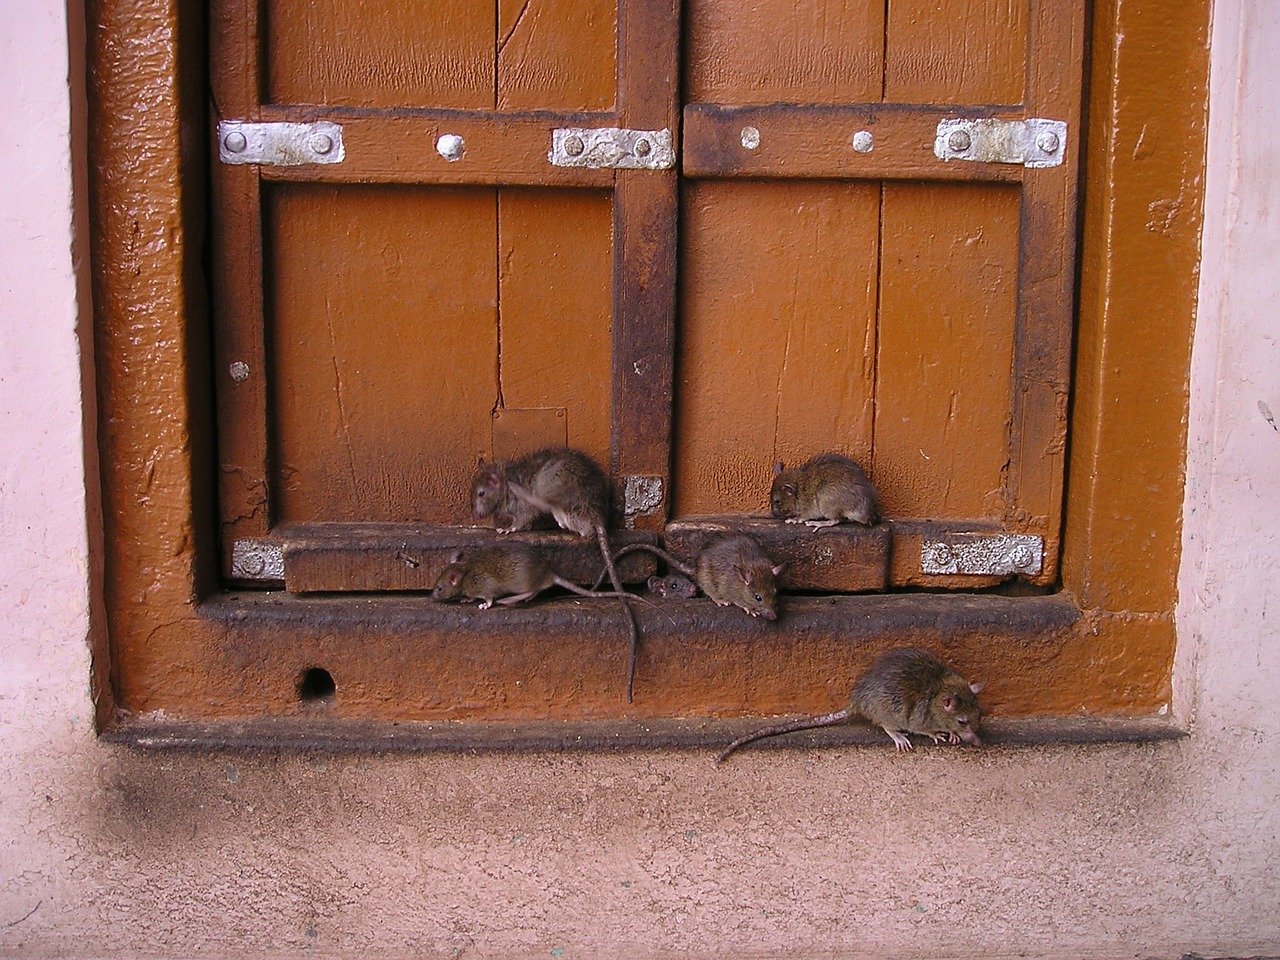 Residence Maybe Infested by Mice or Rats